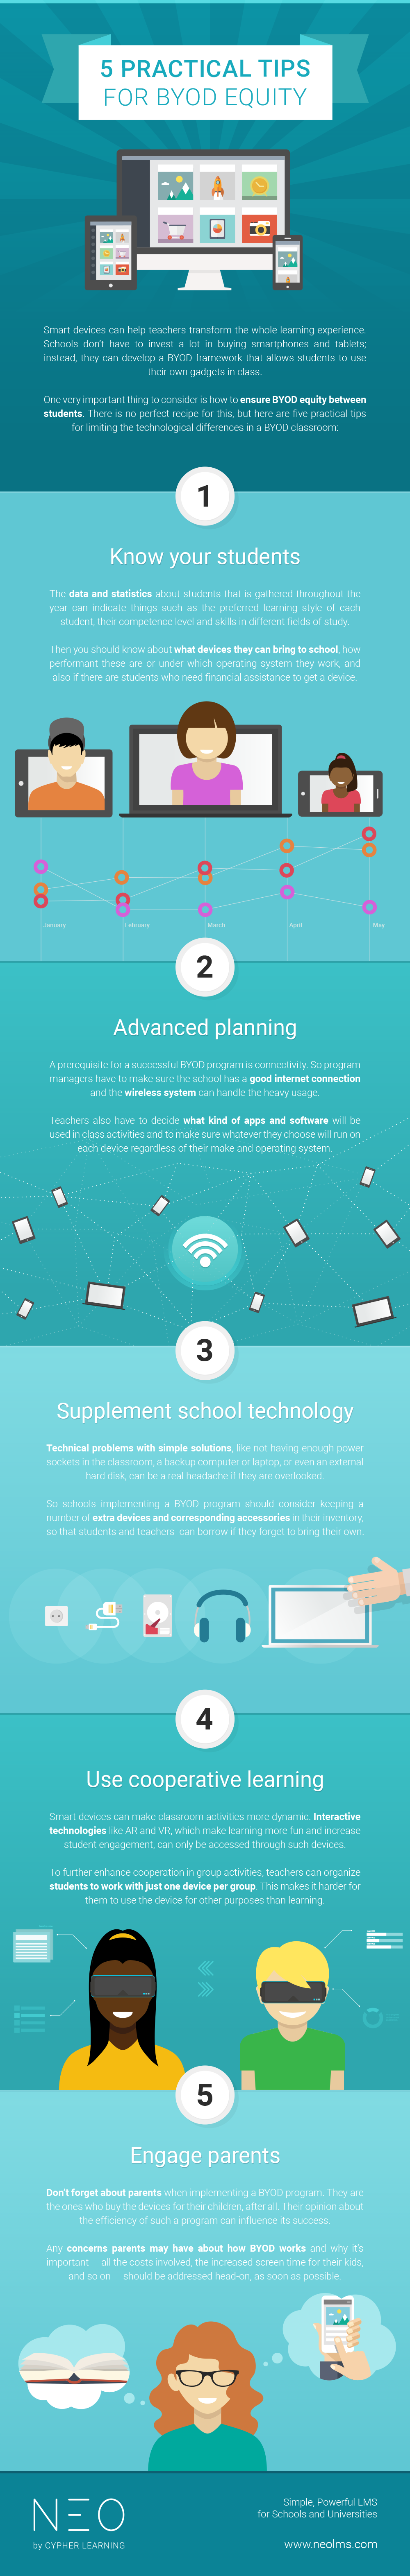 5 Practical Tips for BYOD Equity